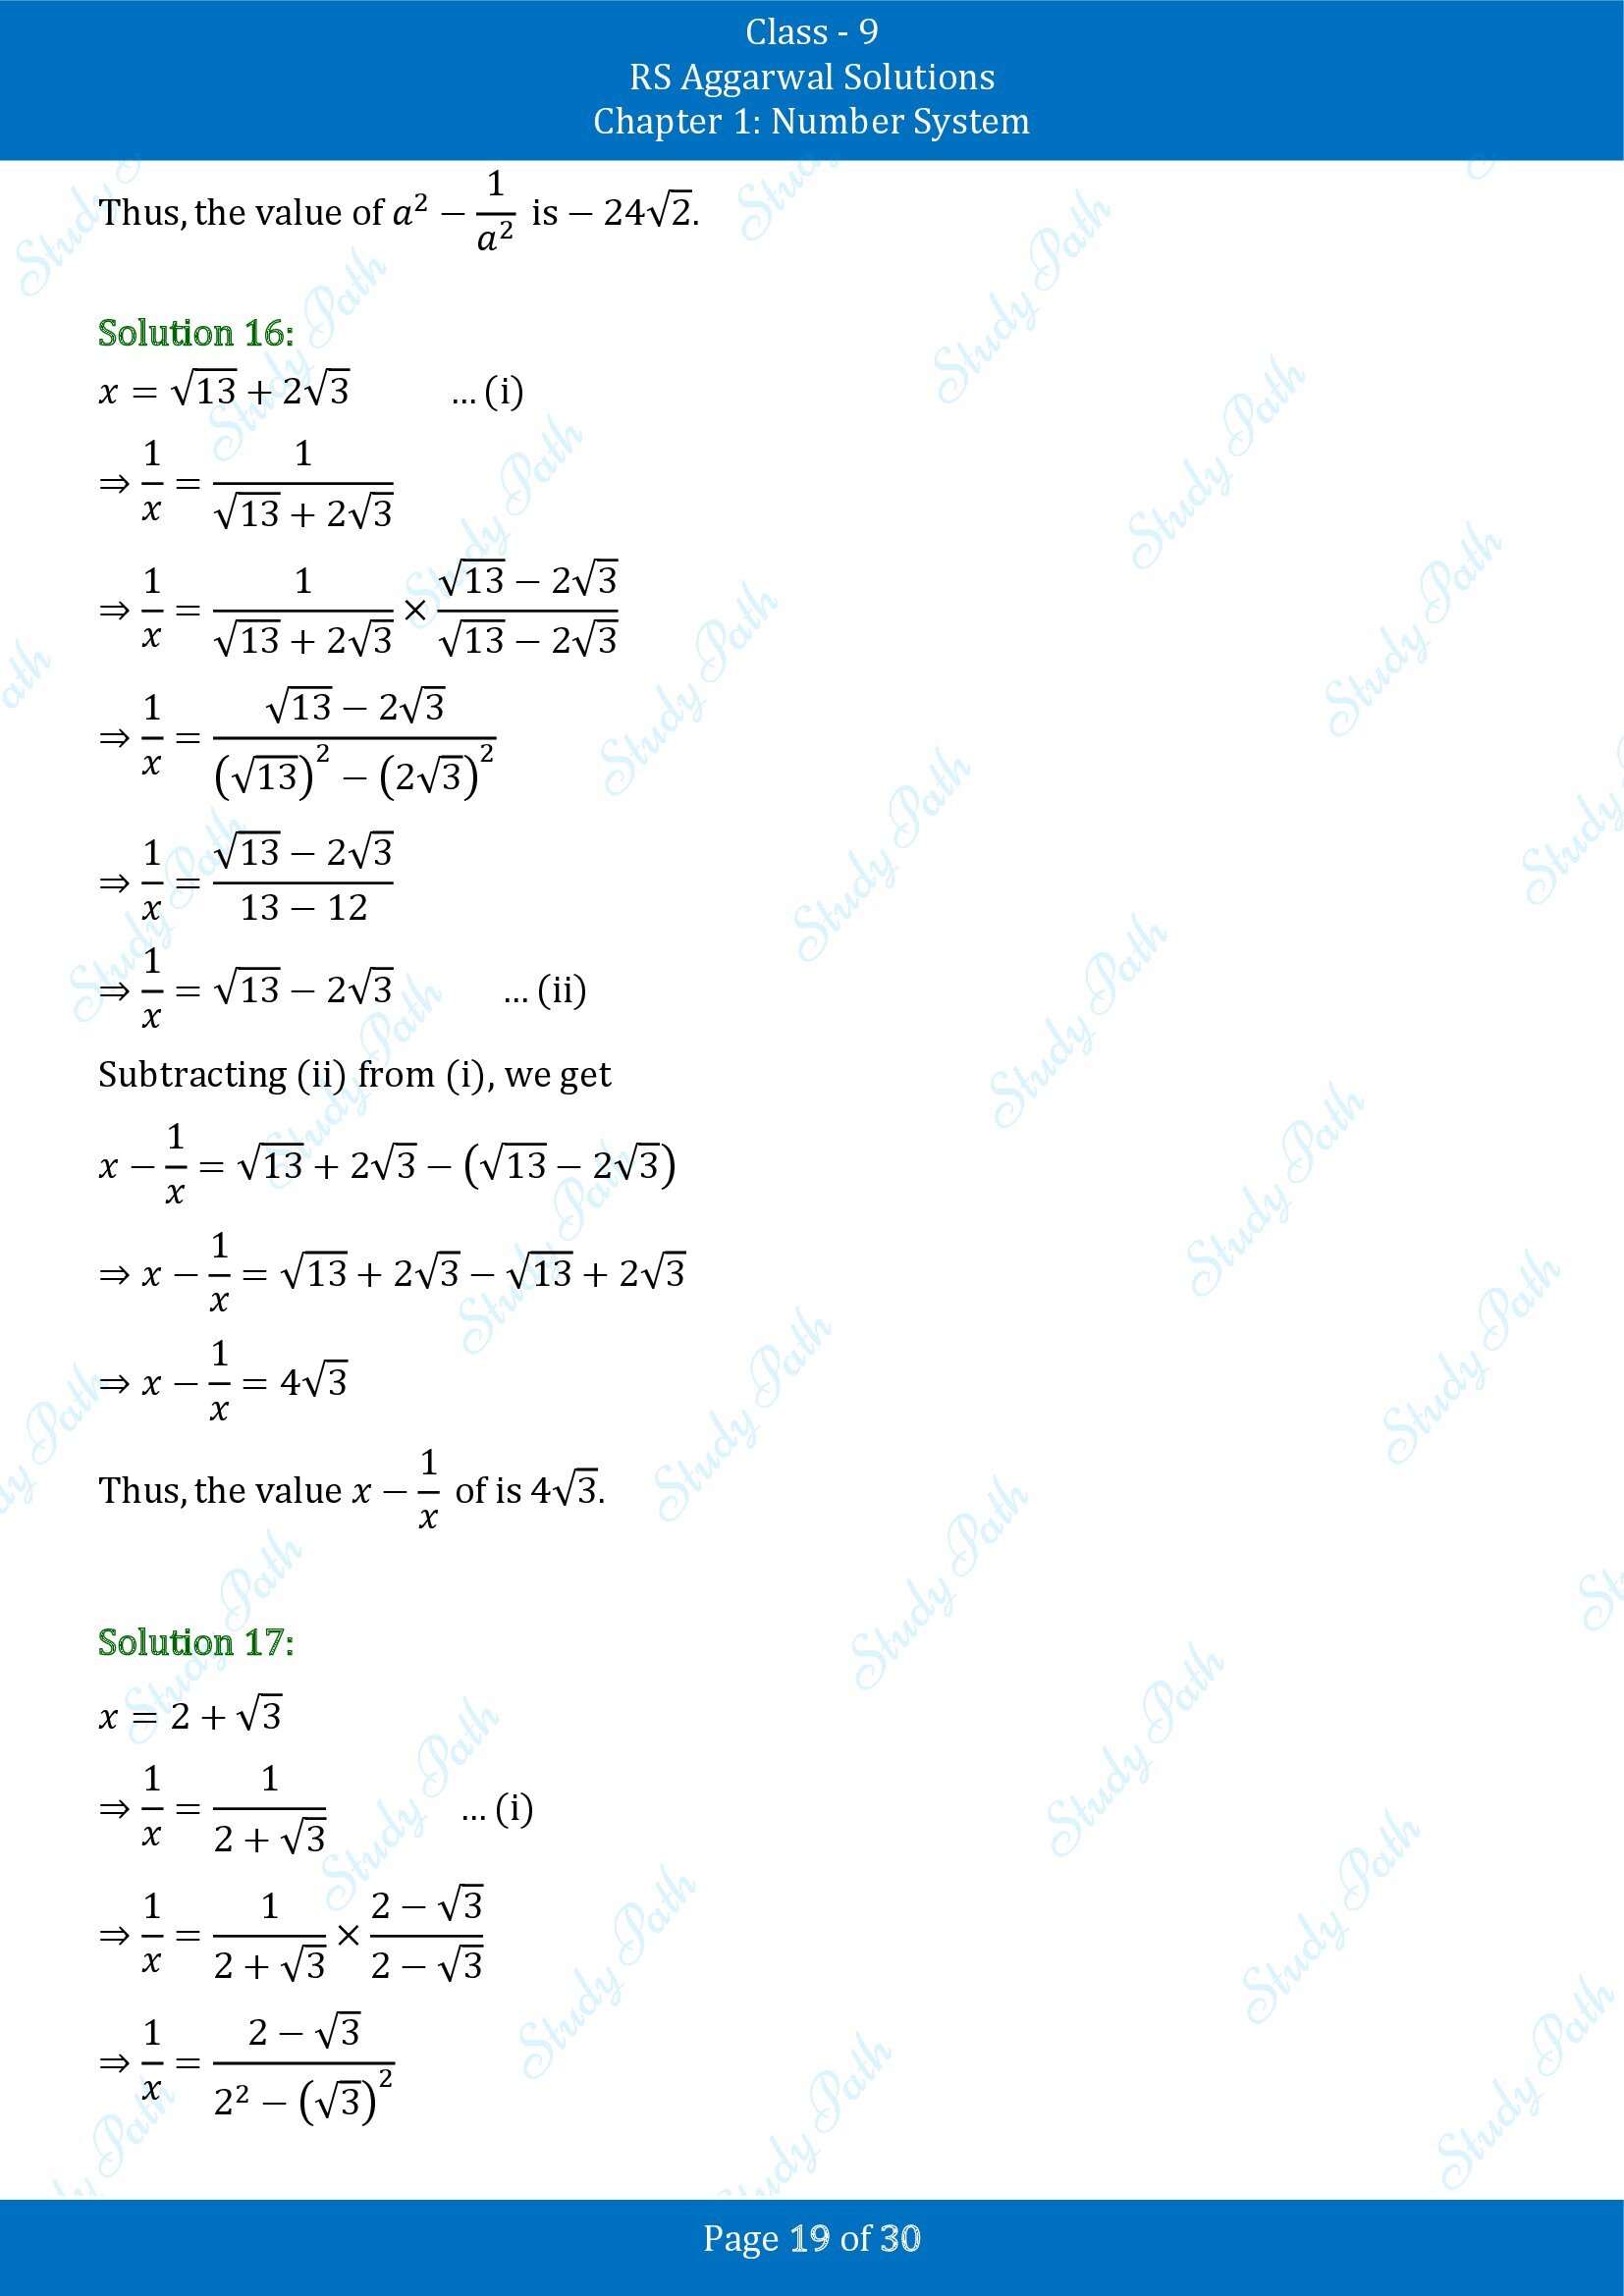 RS Aggarwal Solutions Class 9 Chapter 1 Number System Exercise 1F 00019